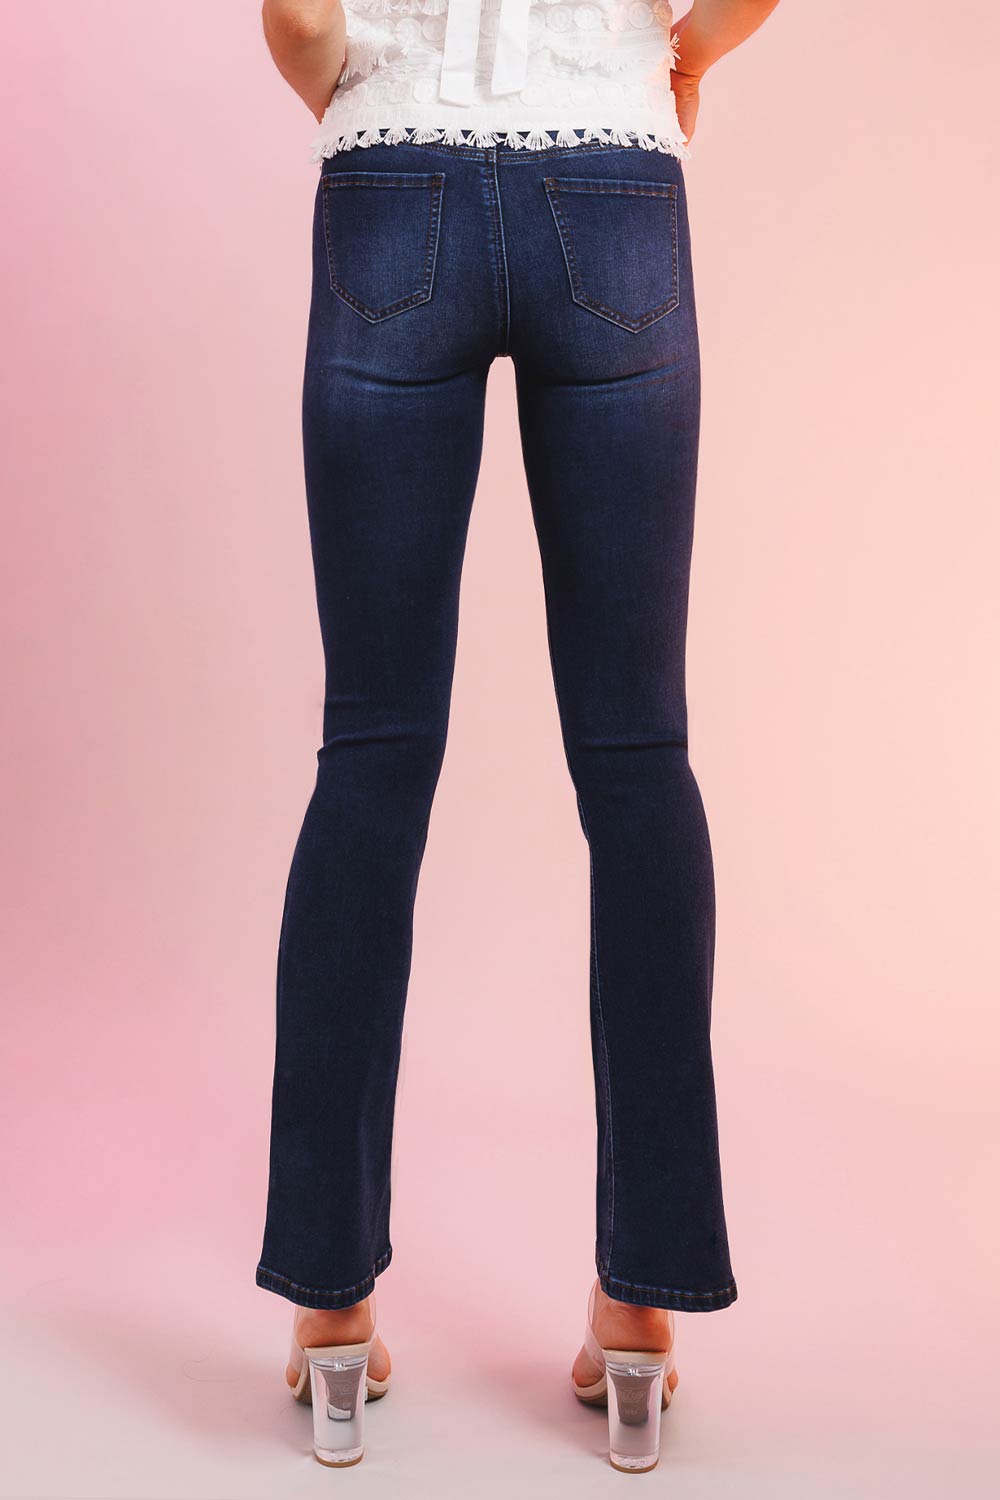 WEP3480 CLASSIC BOOTCUT JEANS MAIN IMAGE